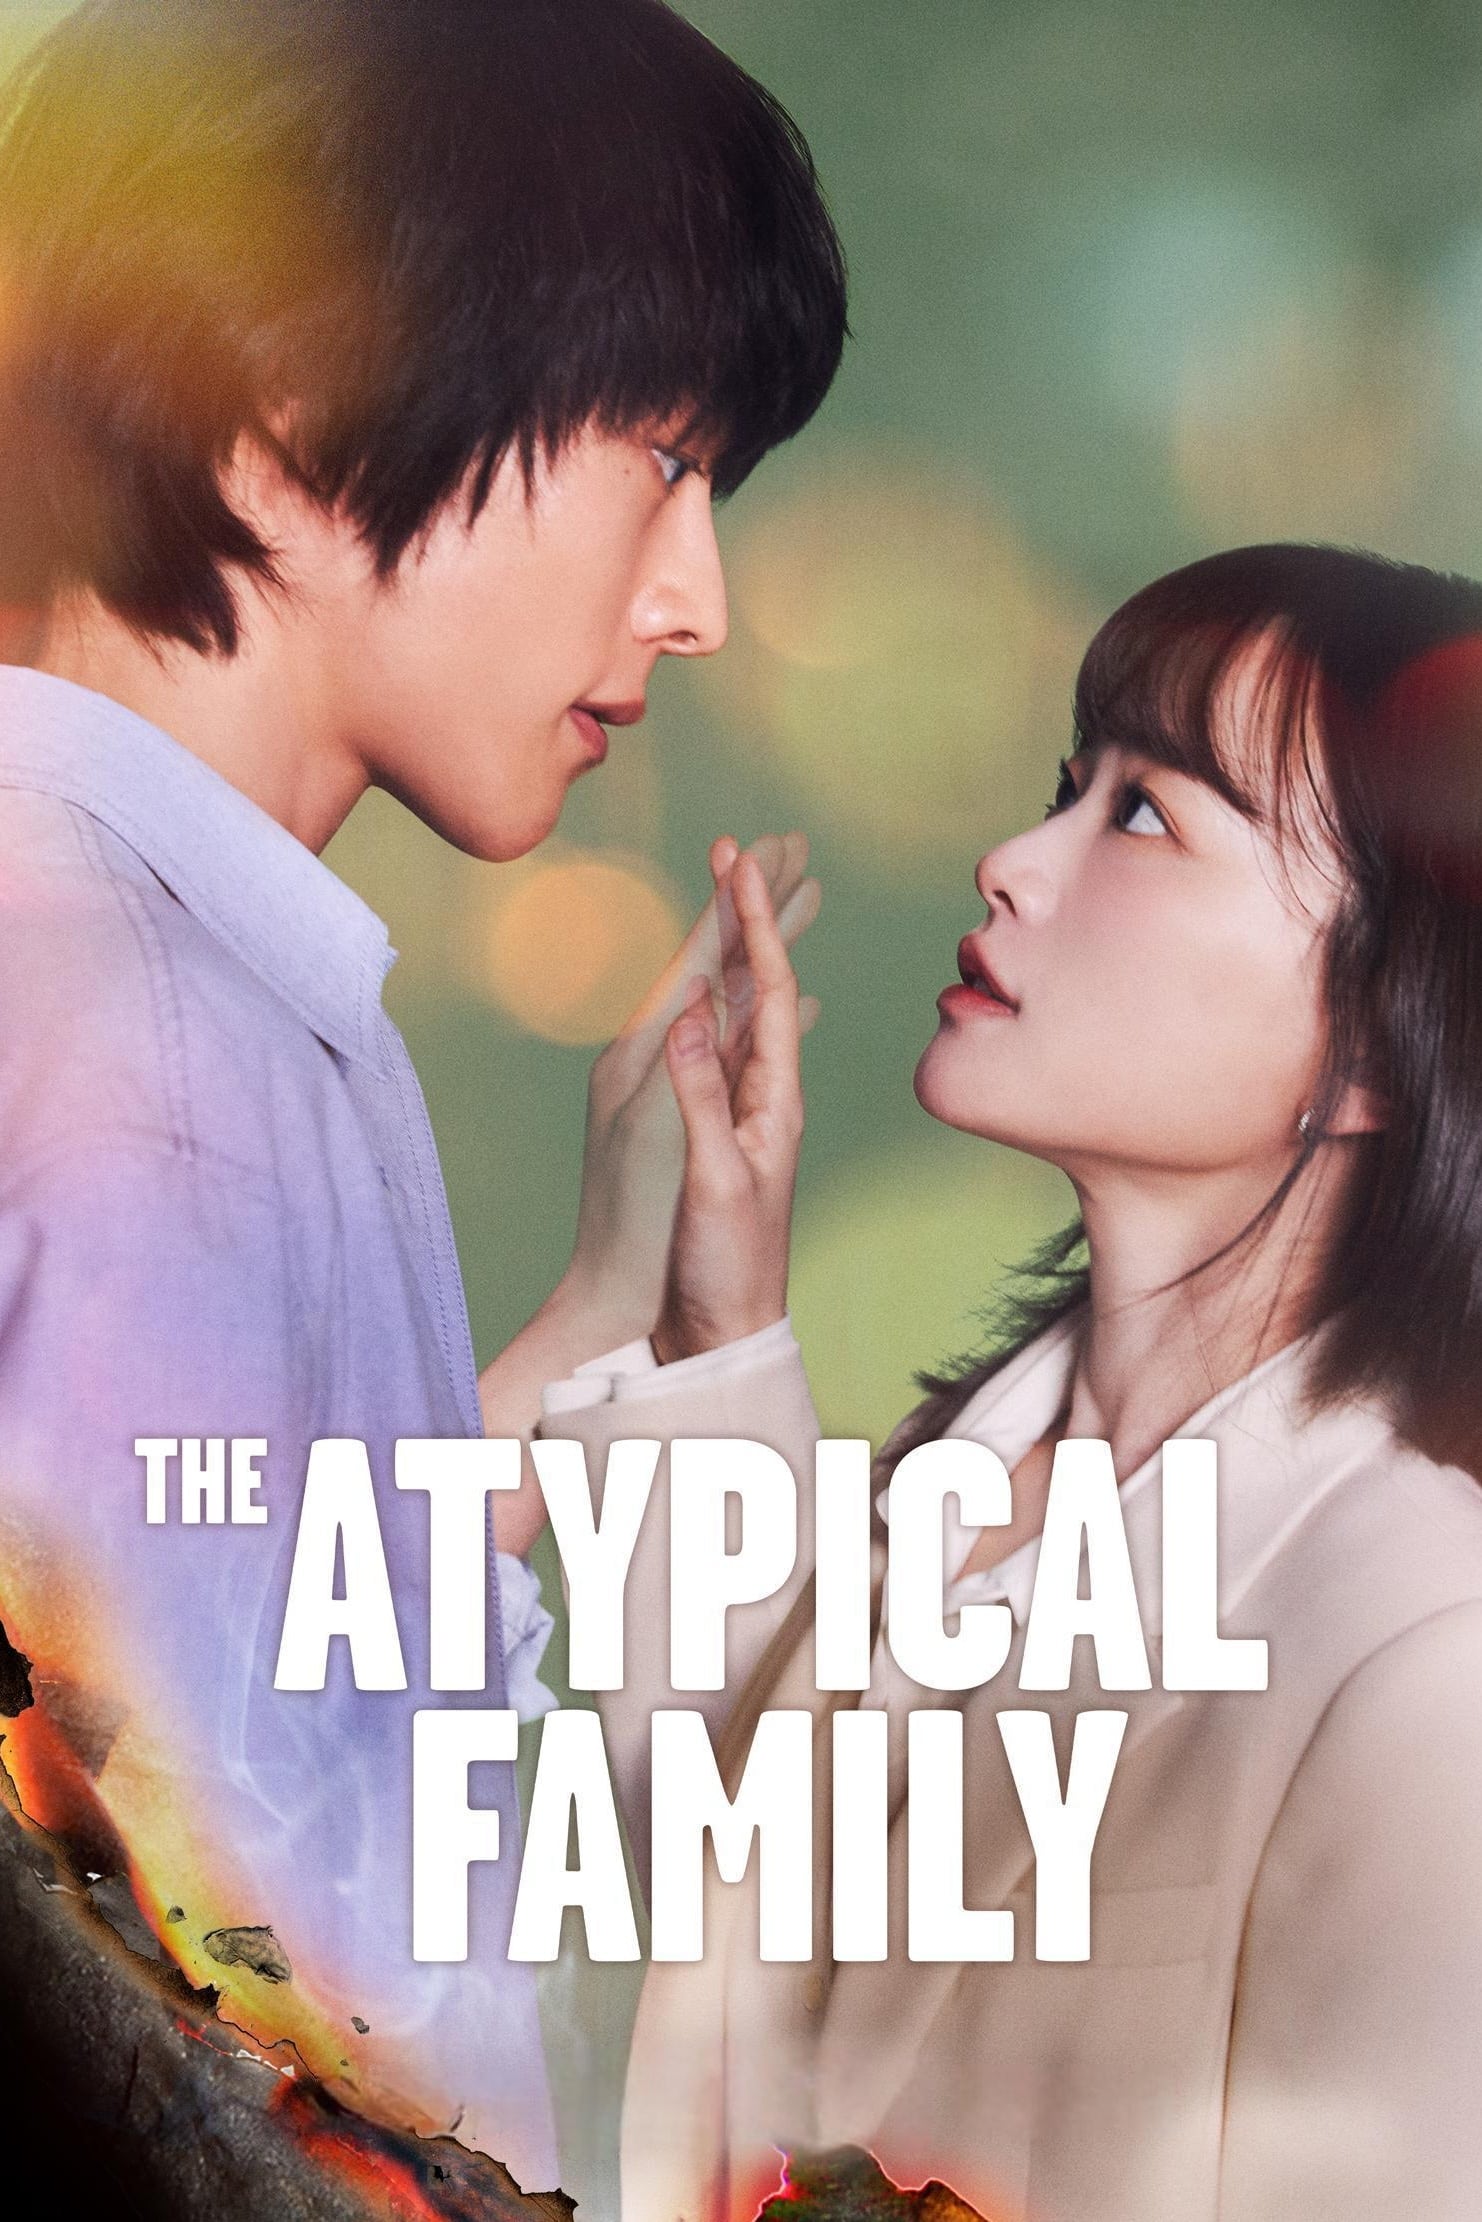 Download The Atypical Family (Season 1) [S01E01 Added] {Korean With English Subtitles} WeB-DL 720p [350MB] || 1080p [2.5GB]